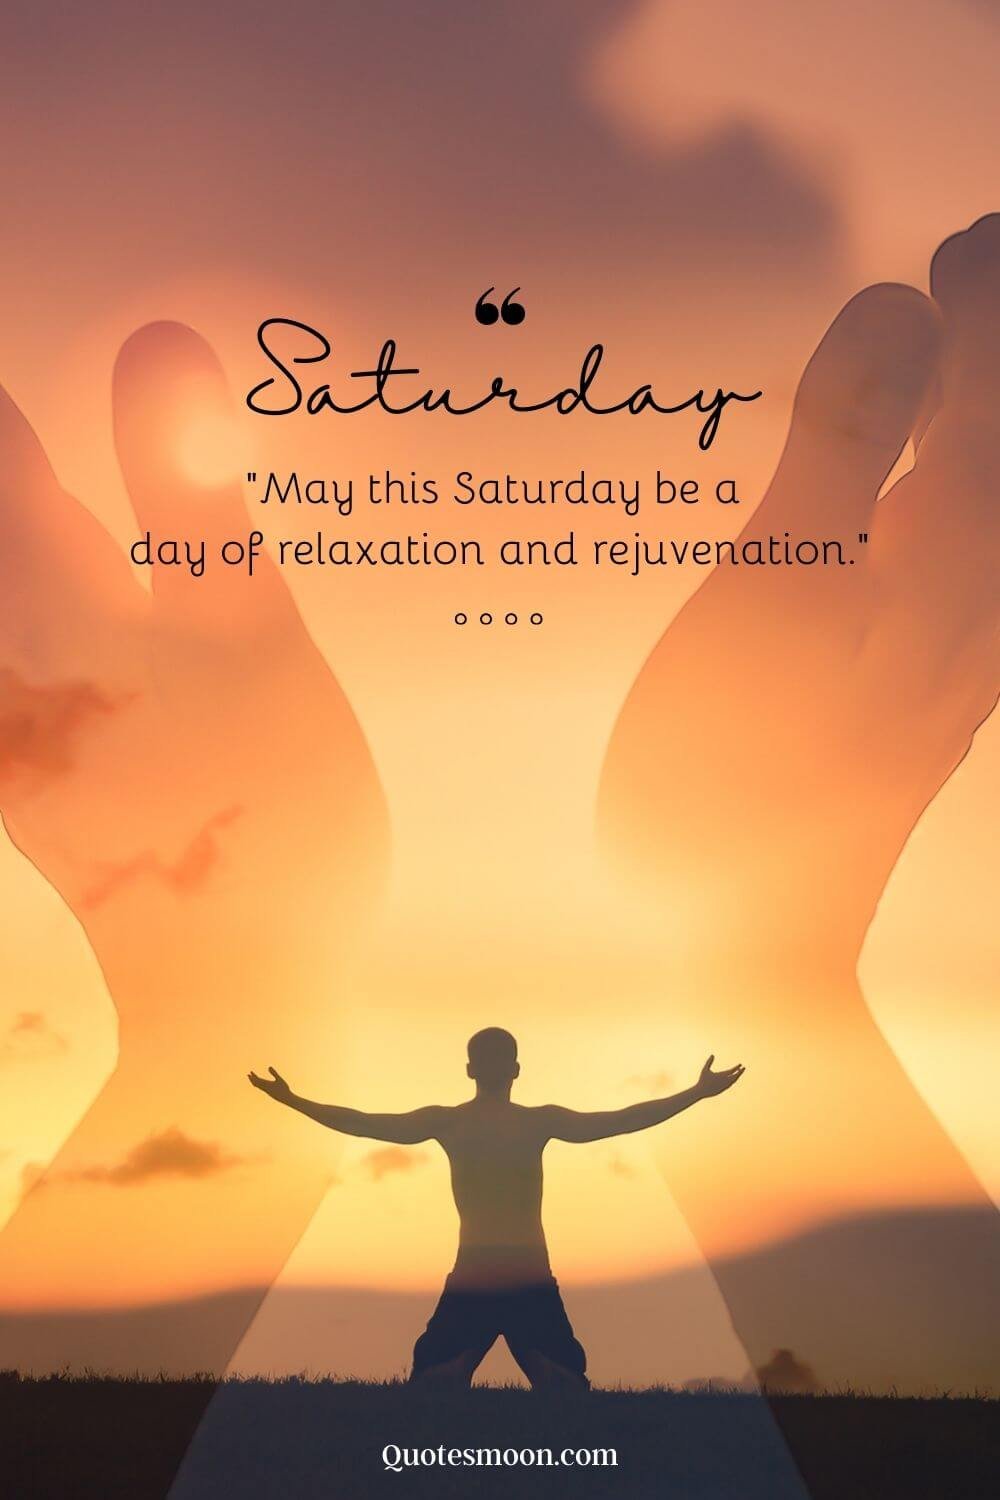 saturday blessings and prayers images